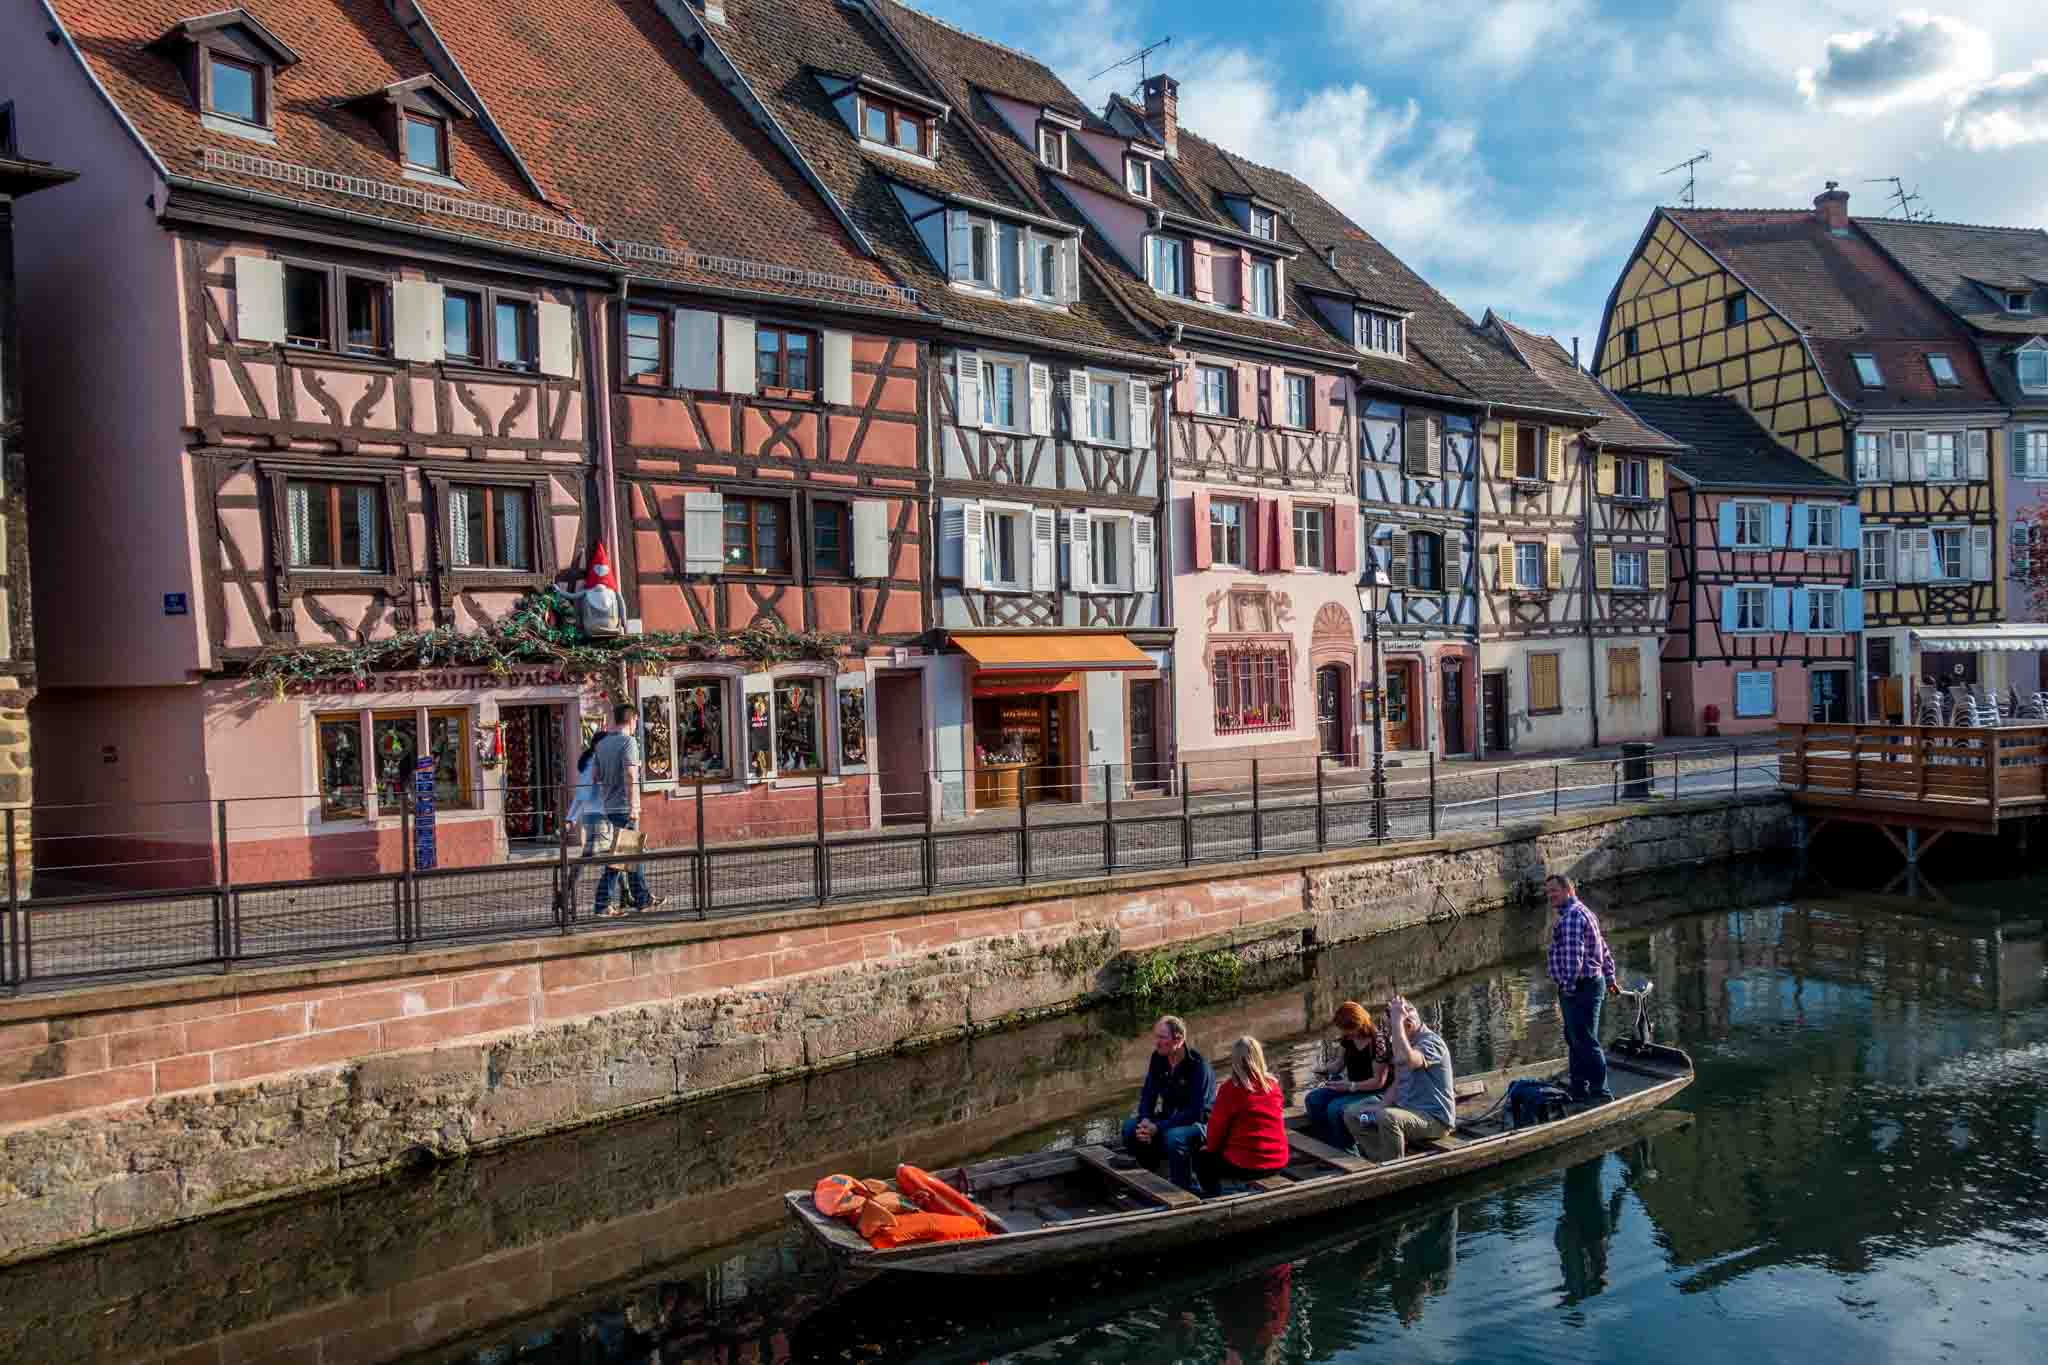 Visiting Petite Venise is one of the top things to do in Colmar France